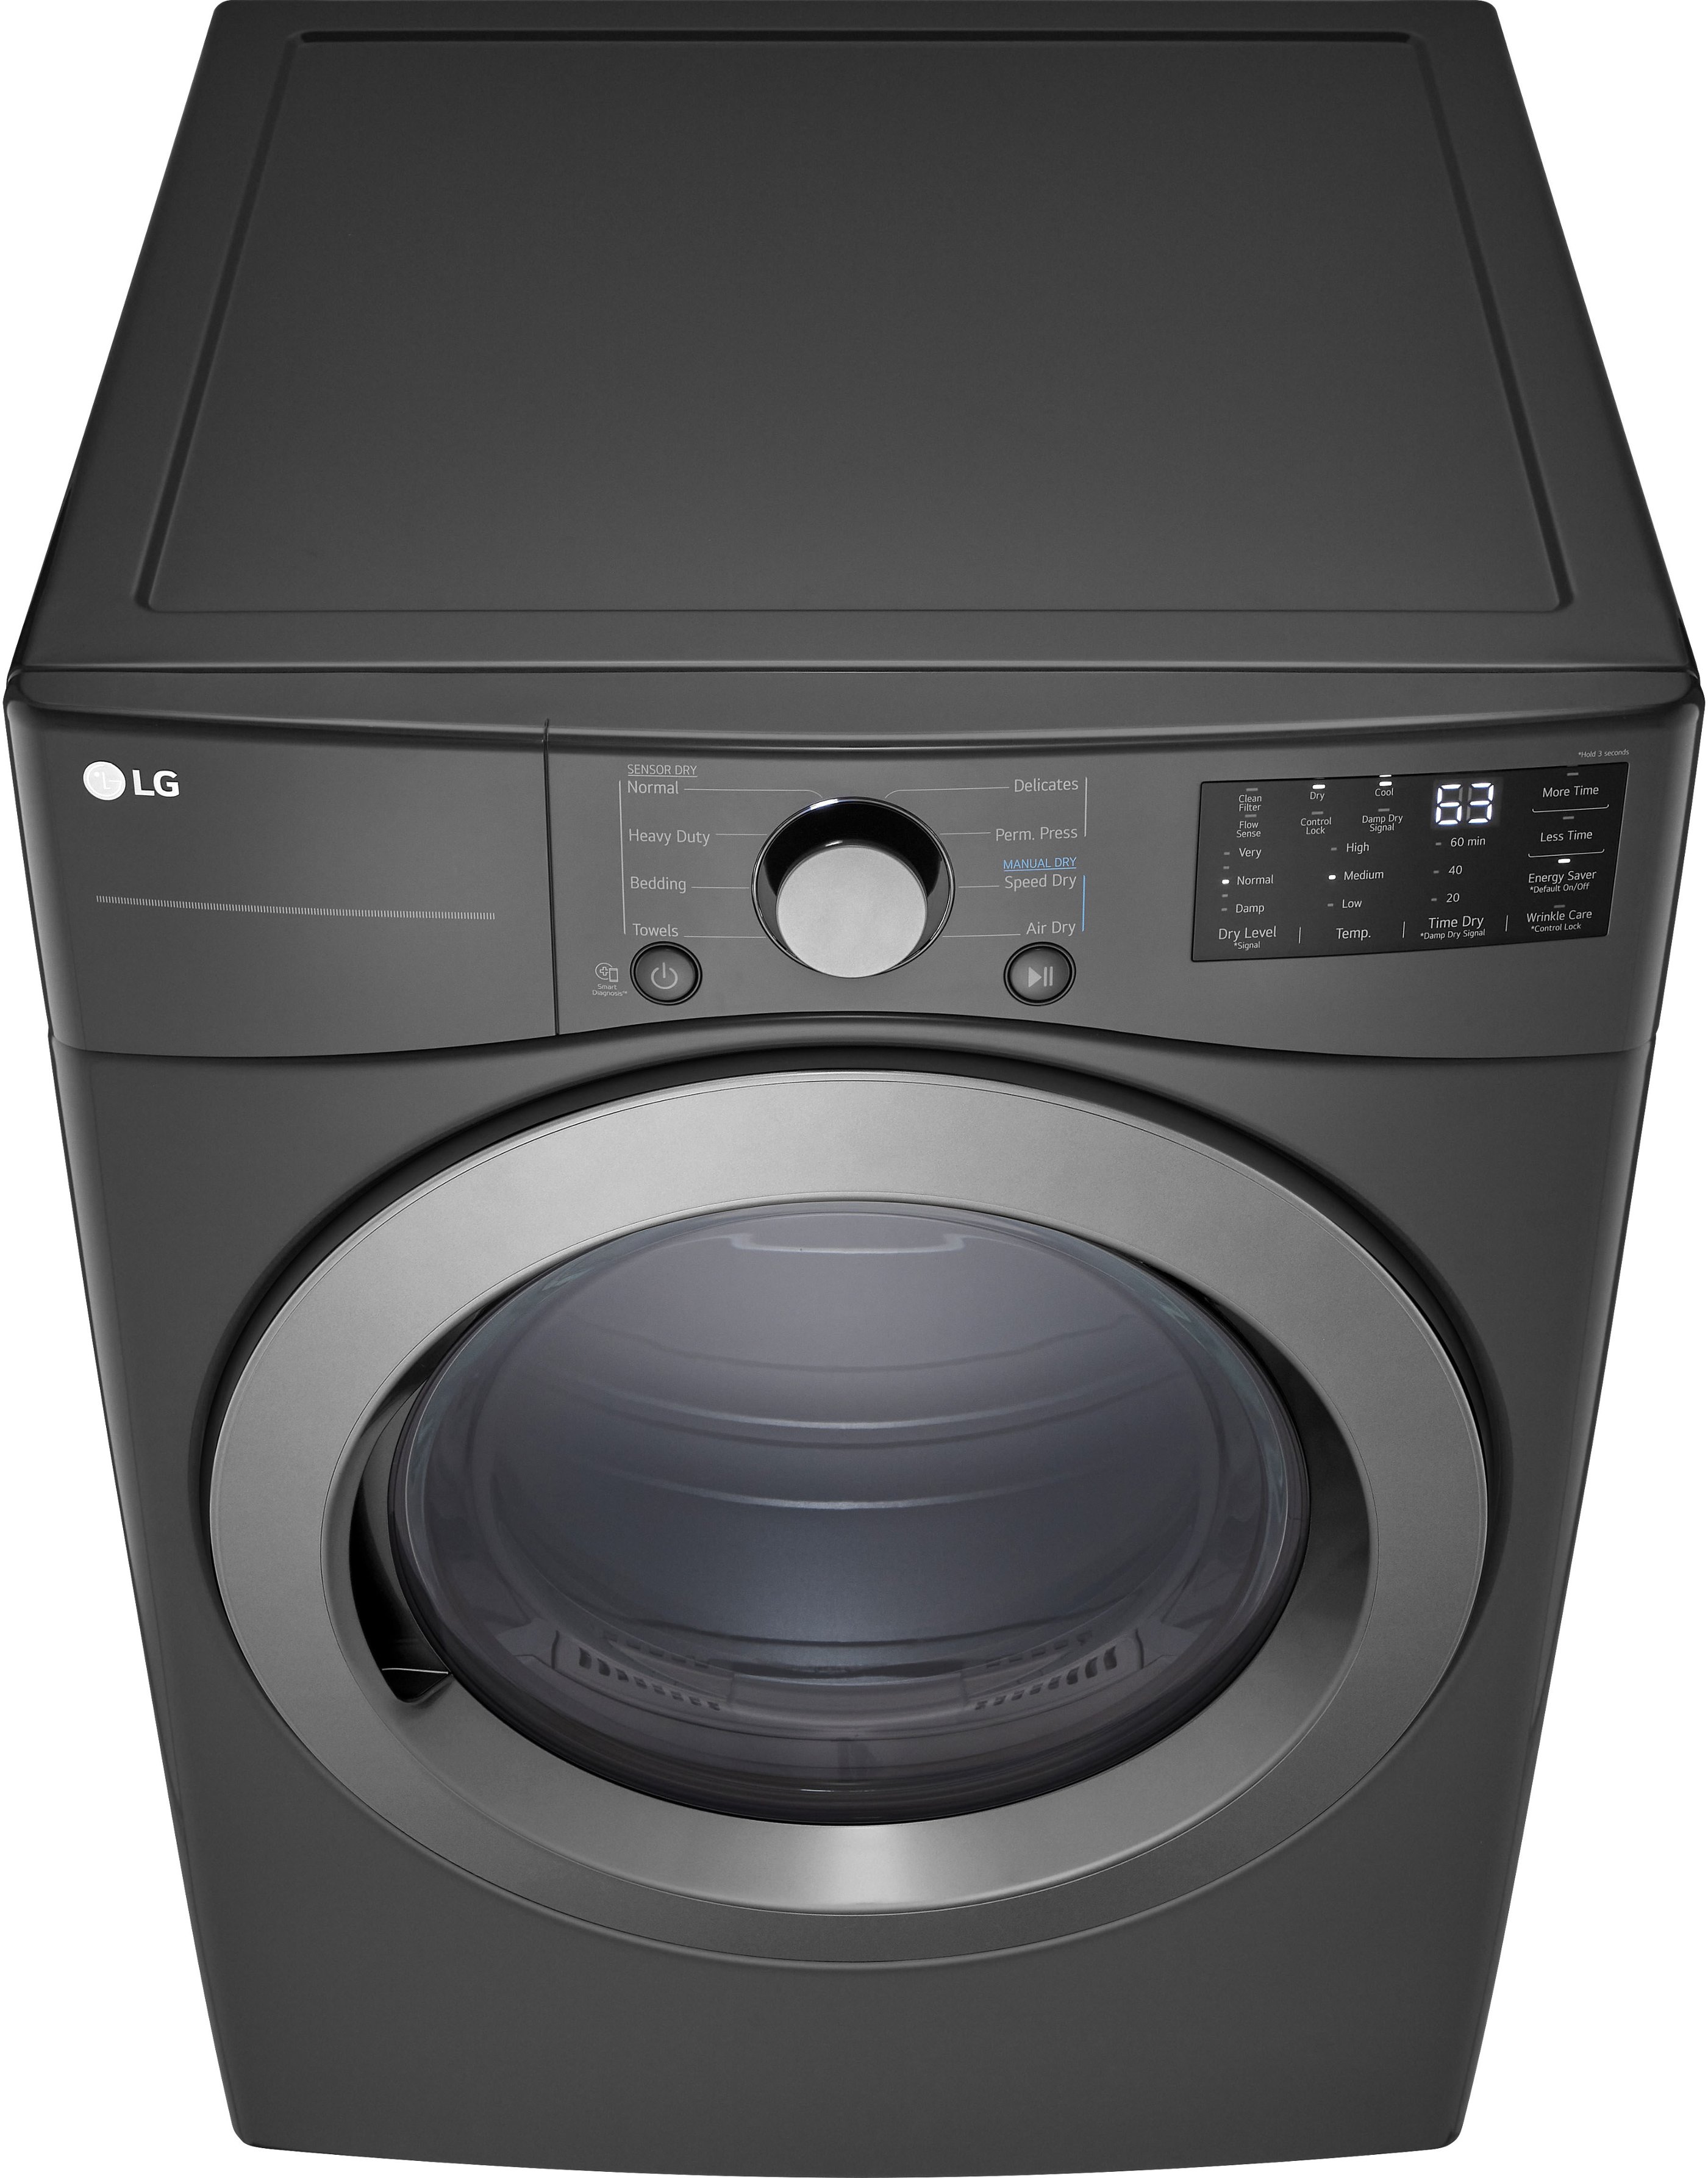 Why Is My LG Dryer Not Heating Up? - Mid America Service